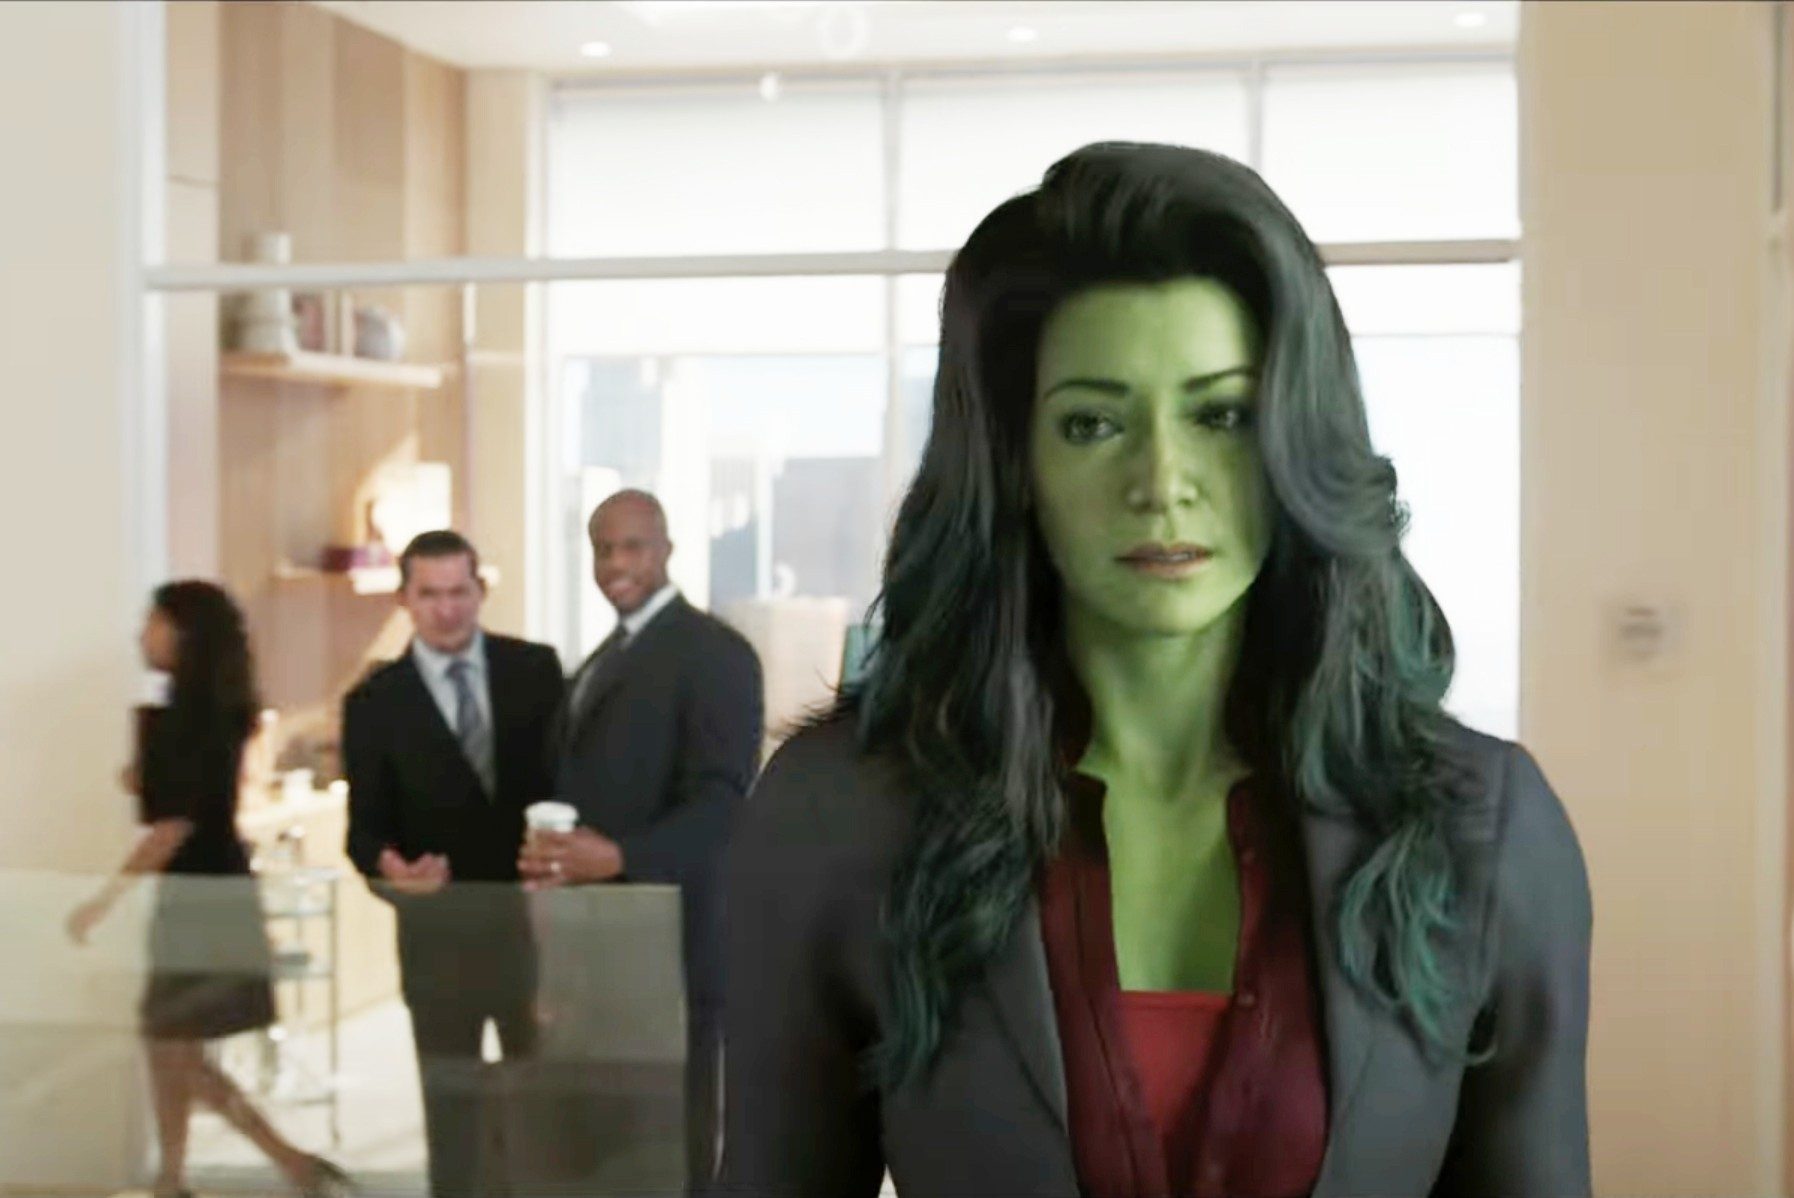 An image of she-hulk shows the title character overhearing two male characters talk